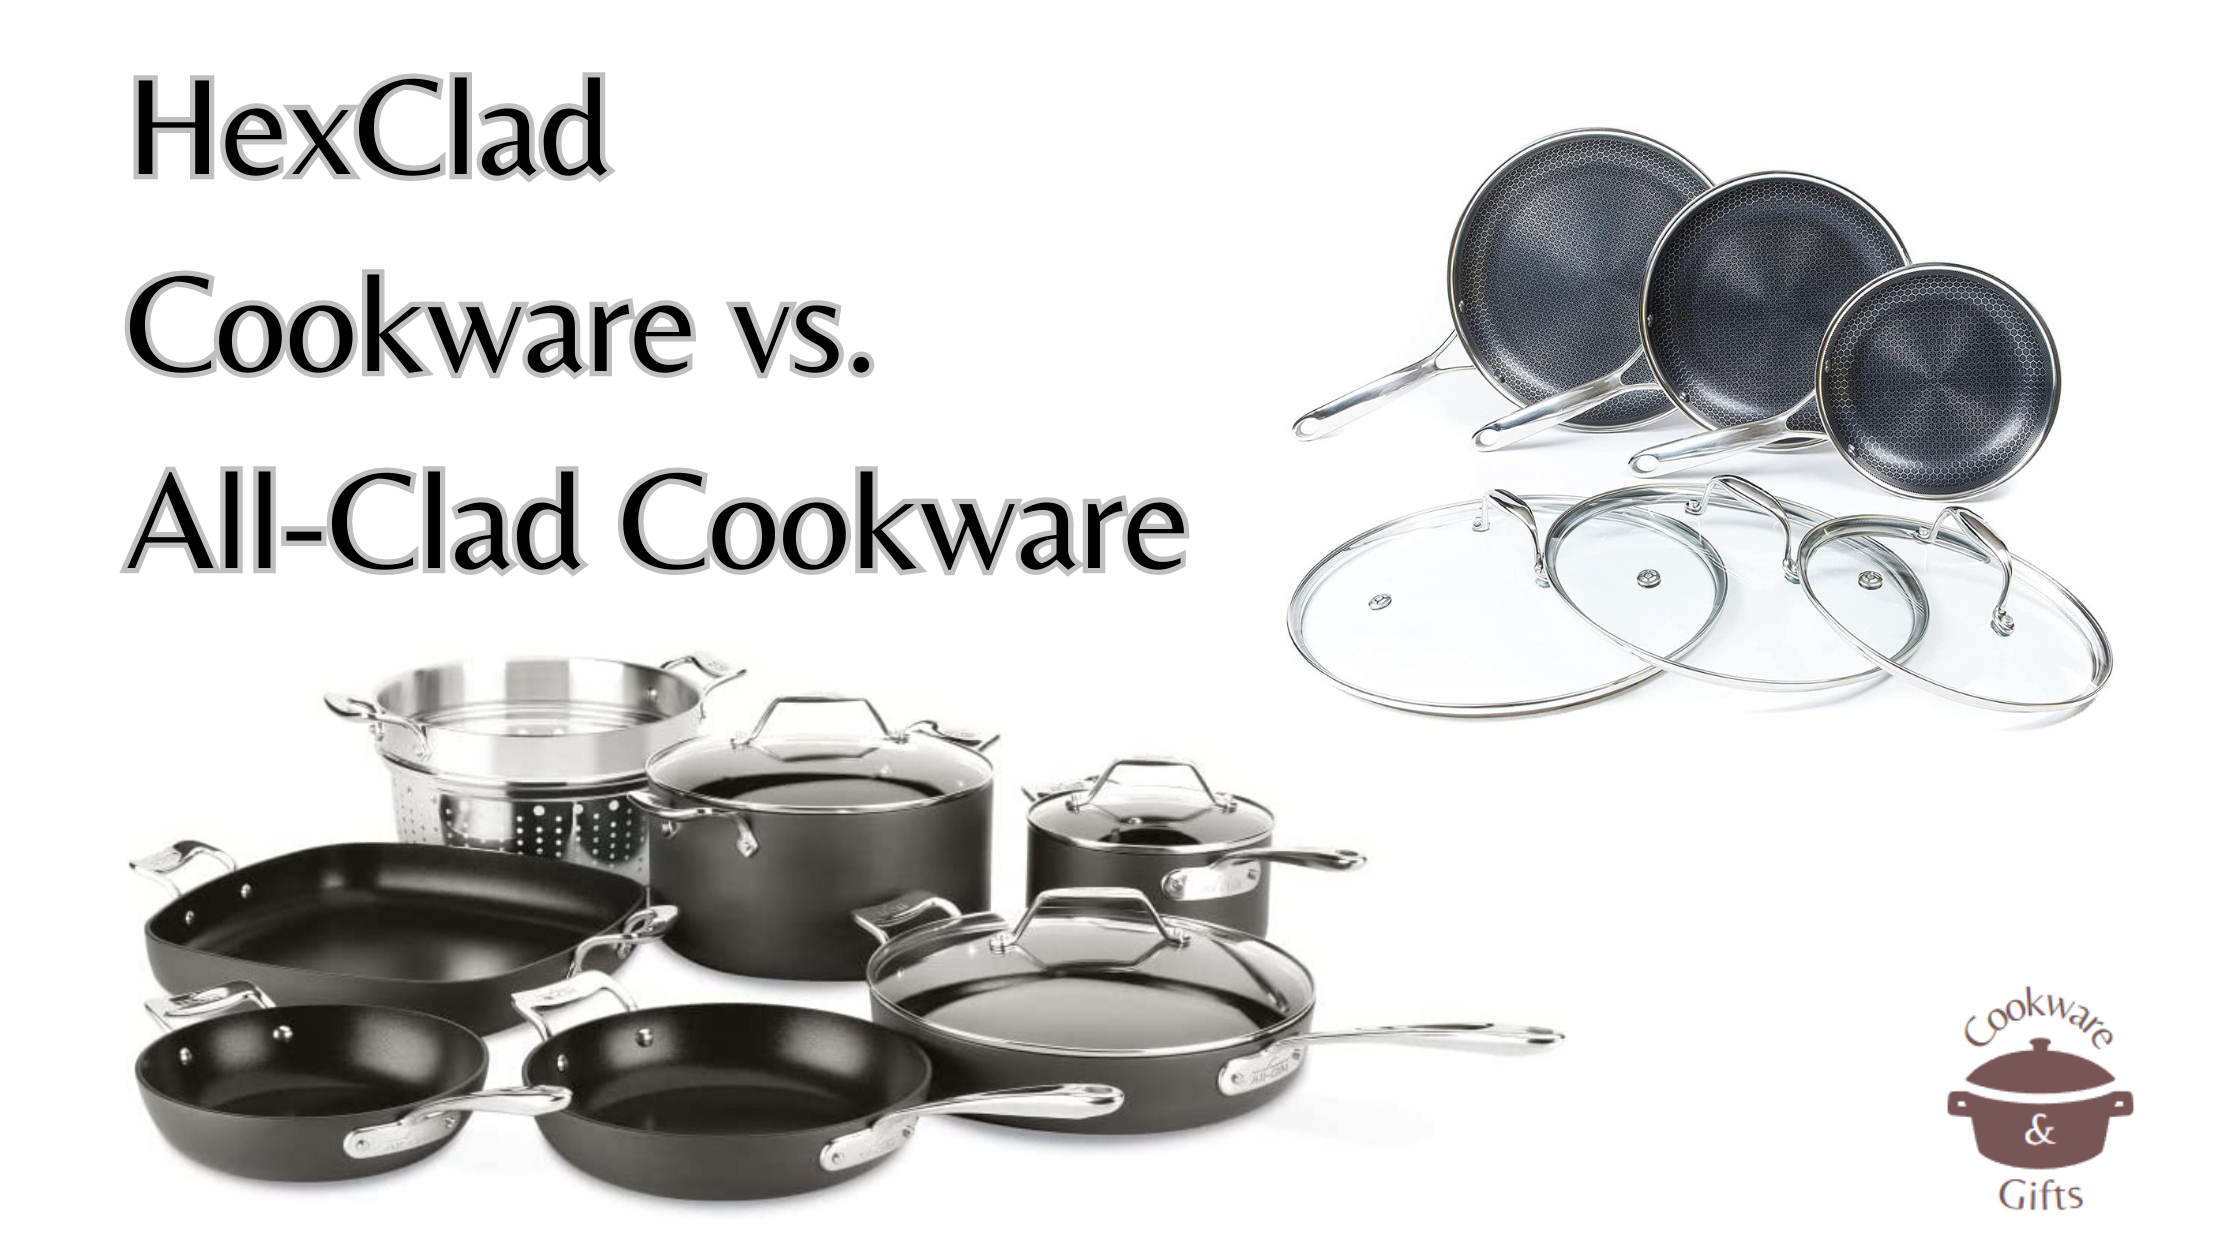 HexClad Cookware vs. All-Clad Cookware: the Ultimate Cookware Showdown!